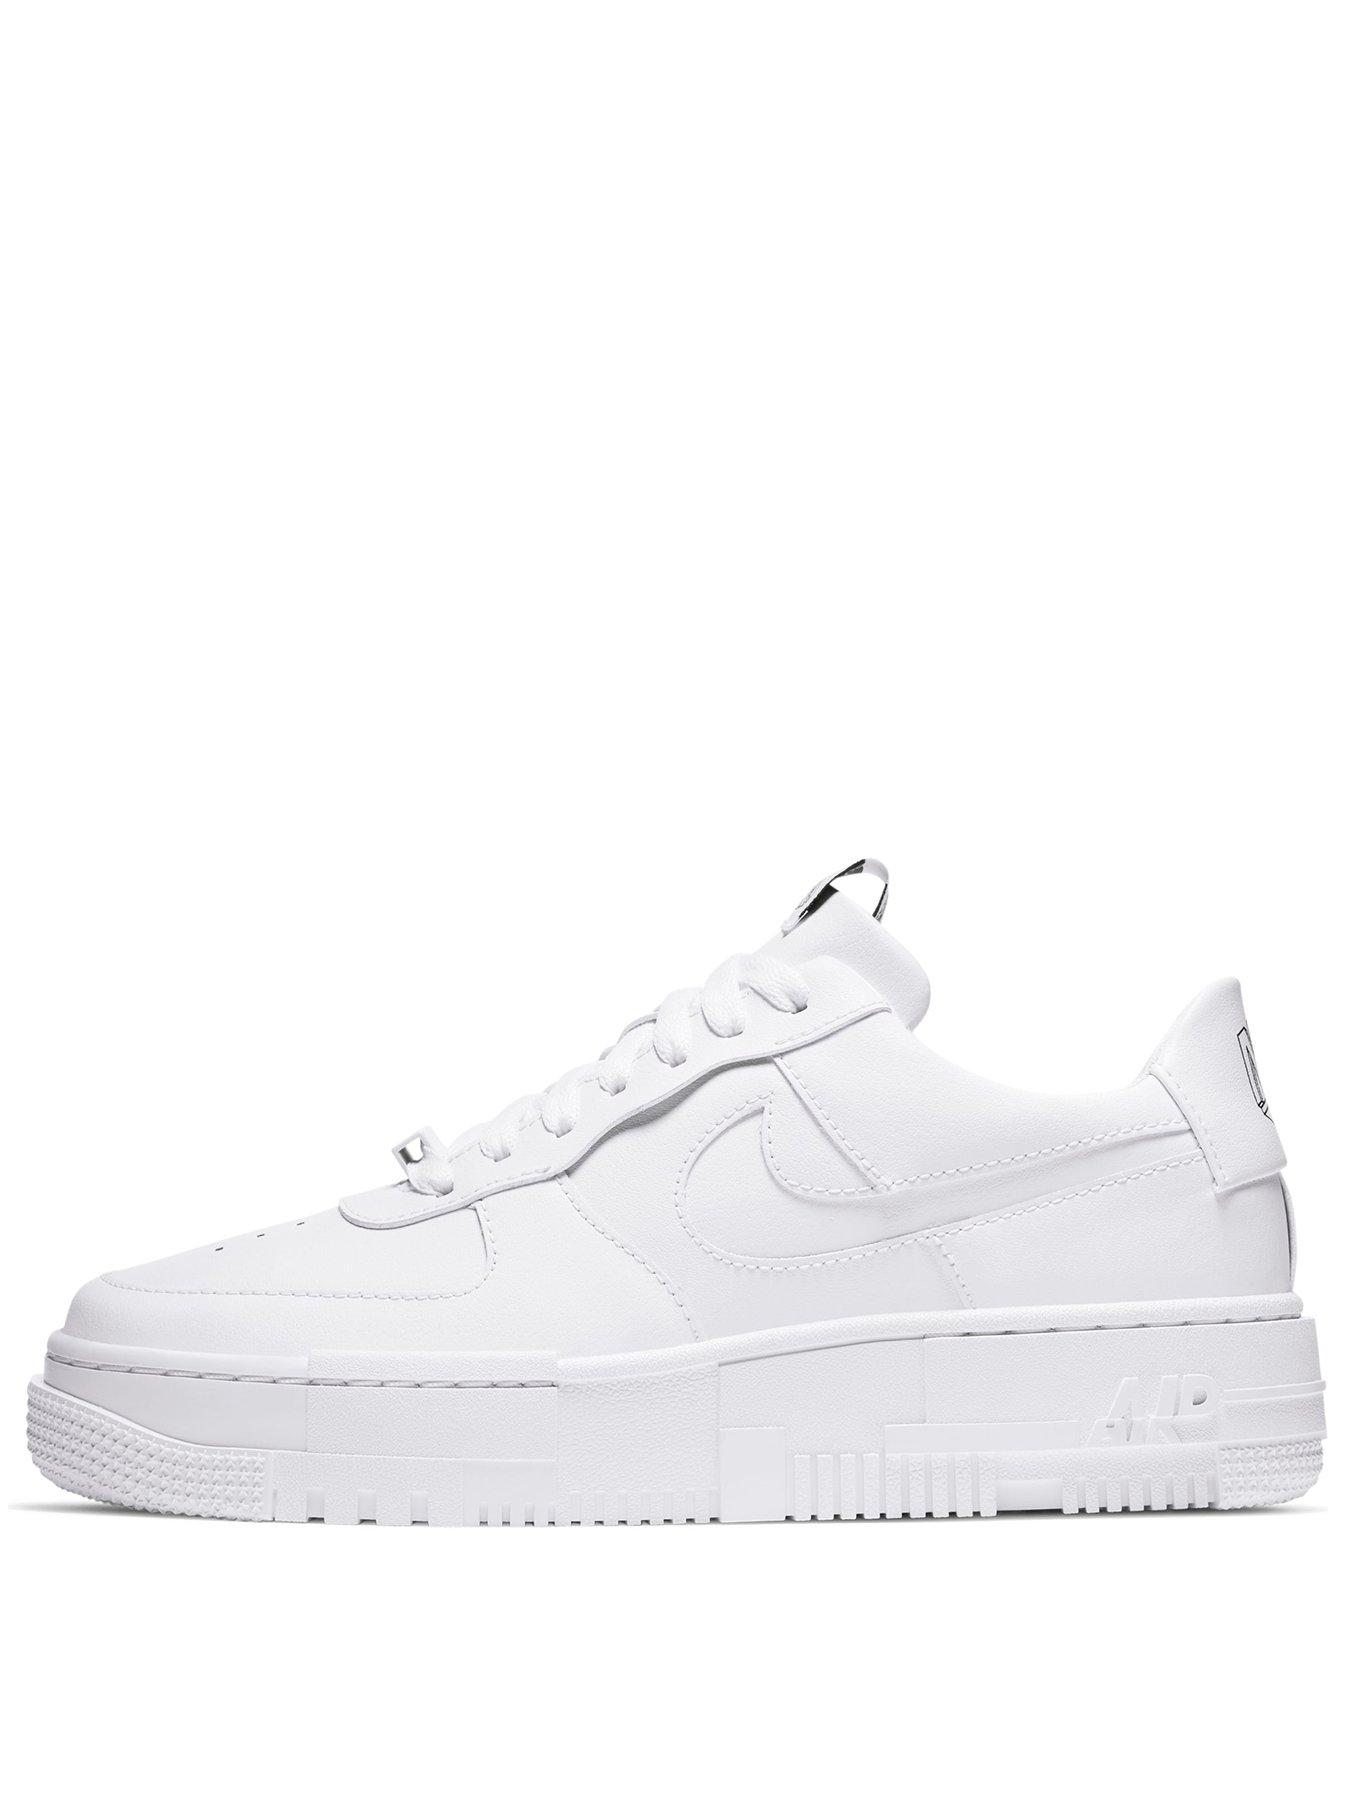 littlewoods air force 1